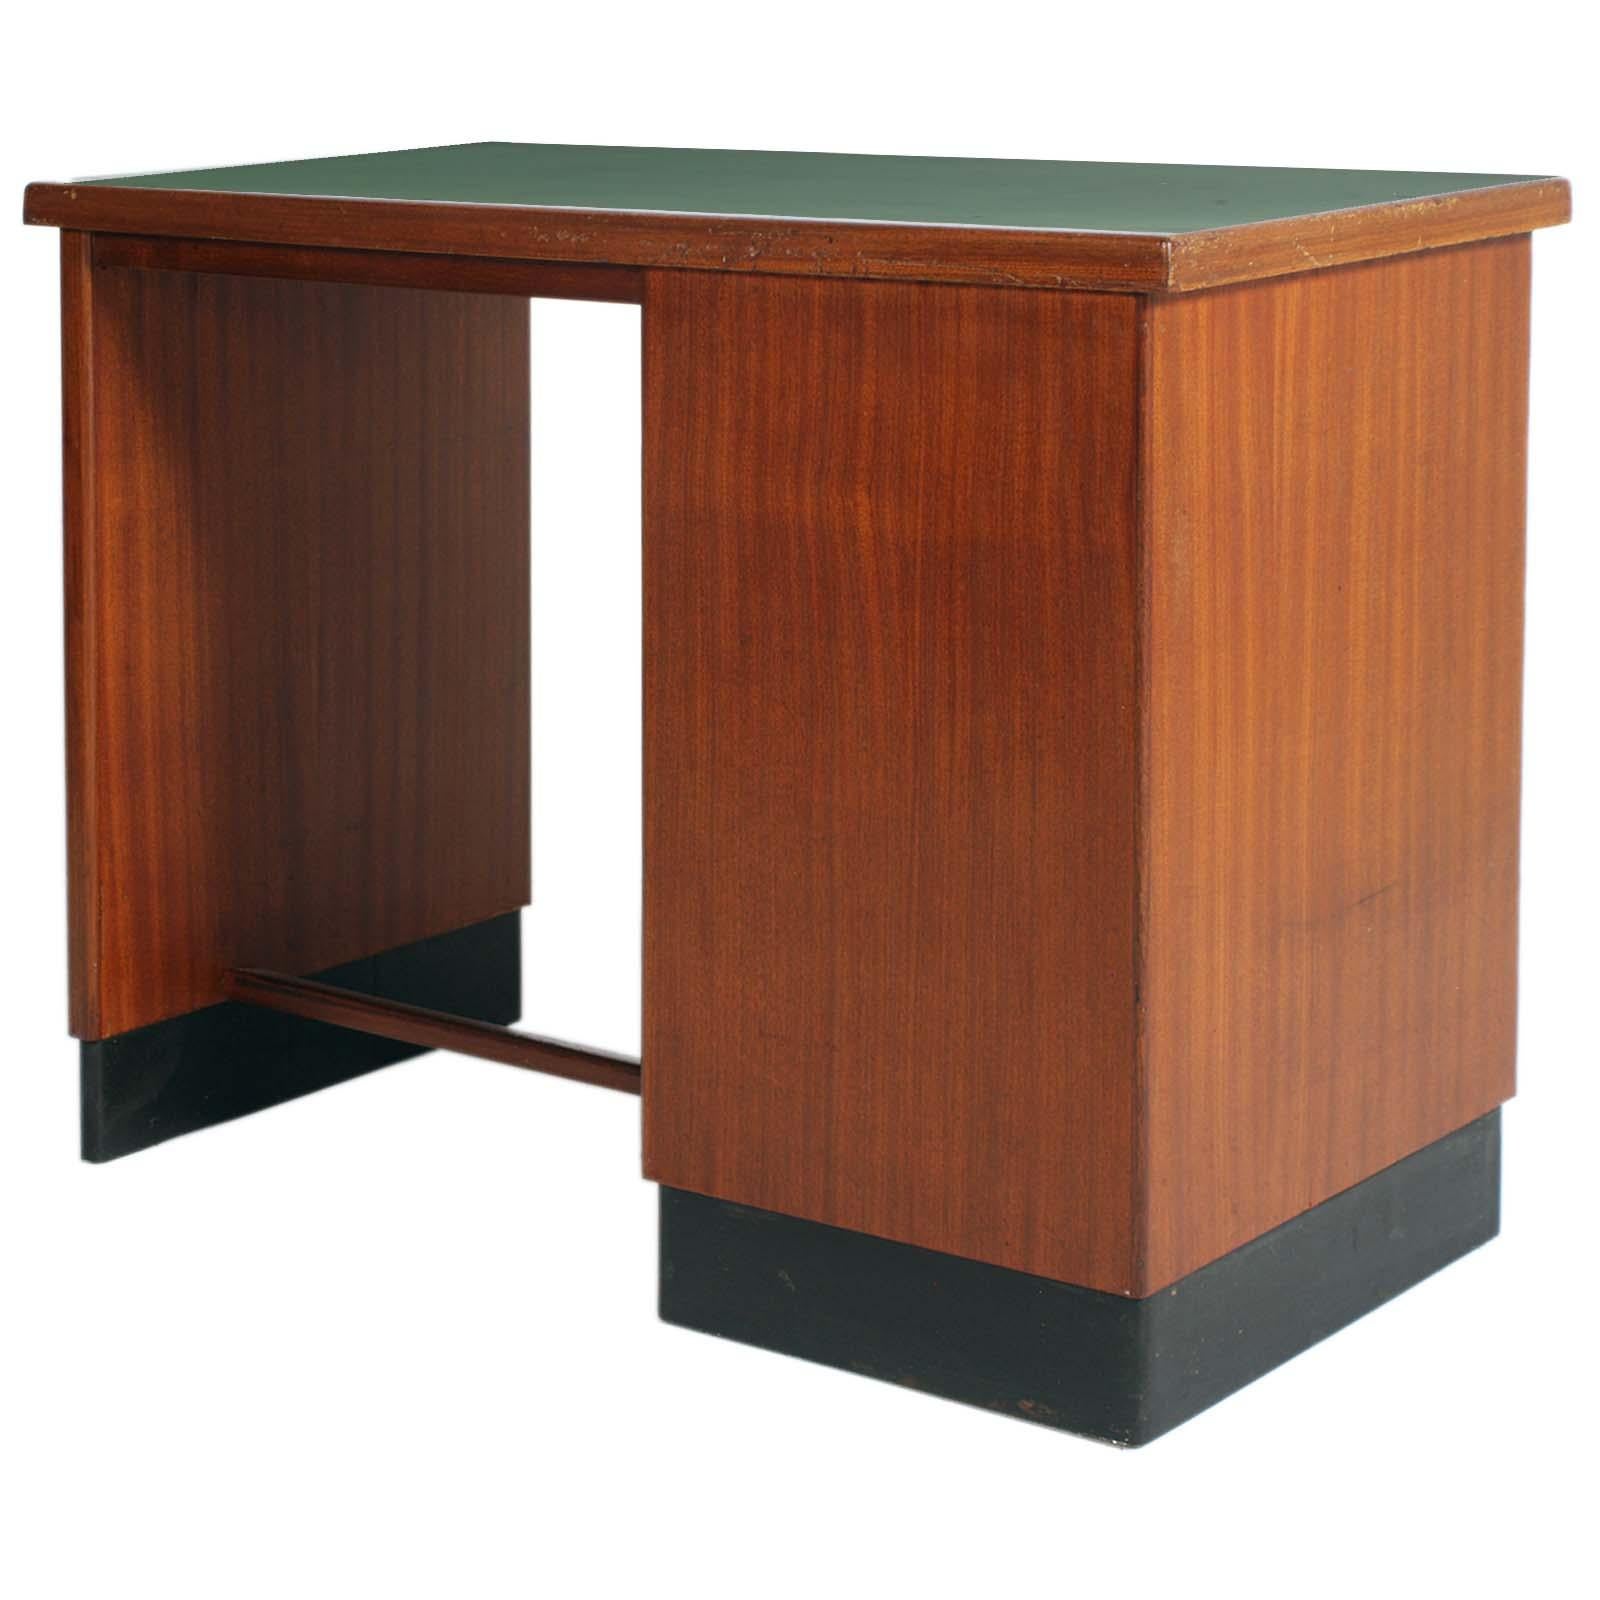 Mid-20th Century 1930s, Italian Art Deco Desk Writing Table Four Drawers in Blond Walnut For Sale